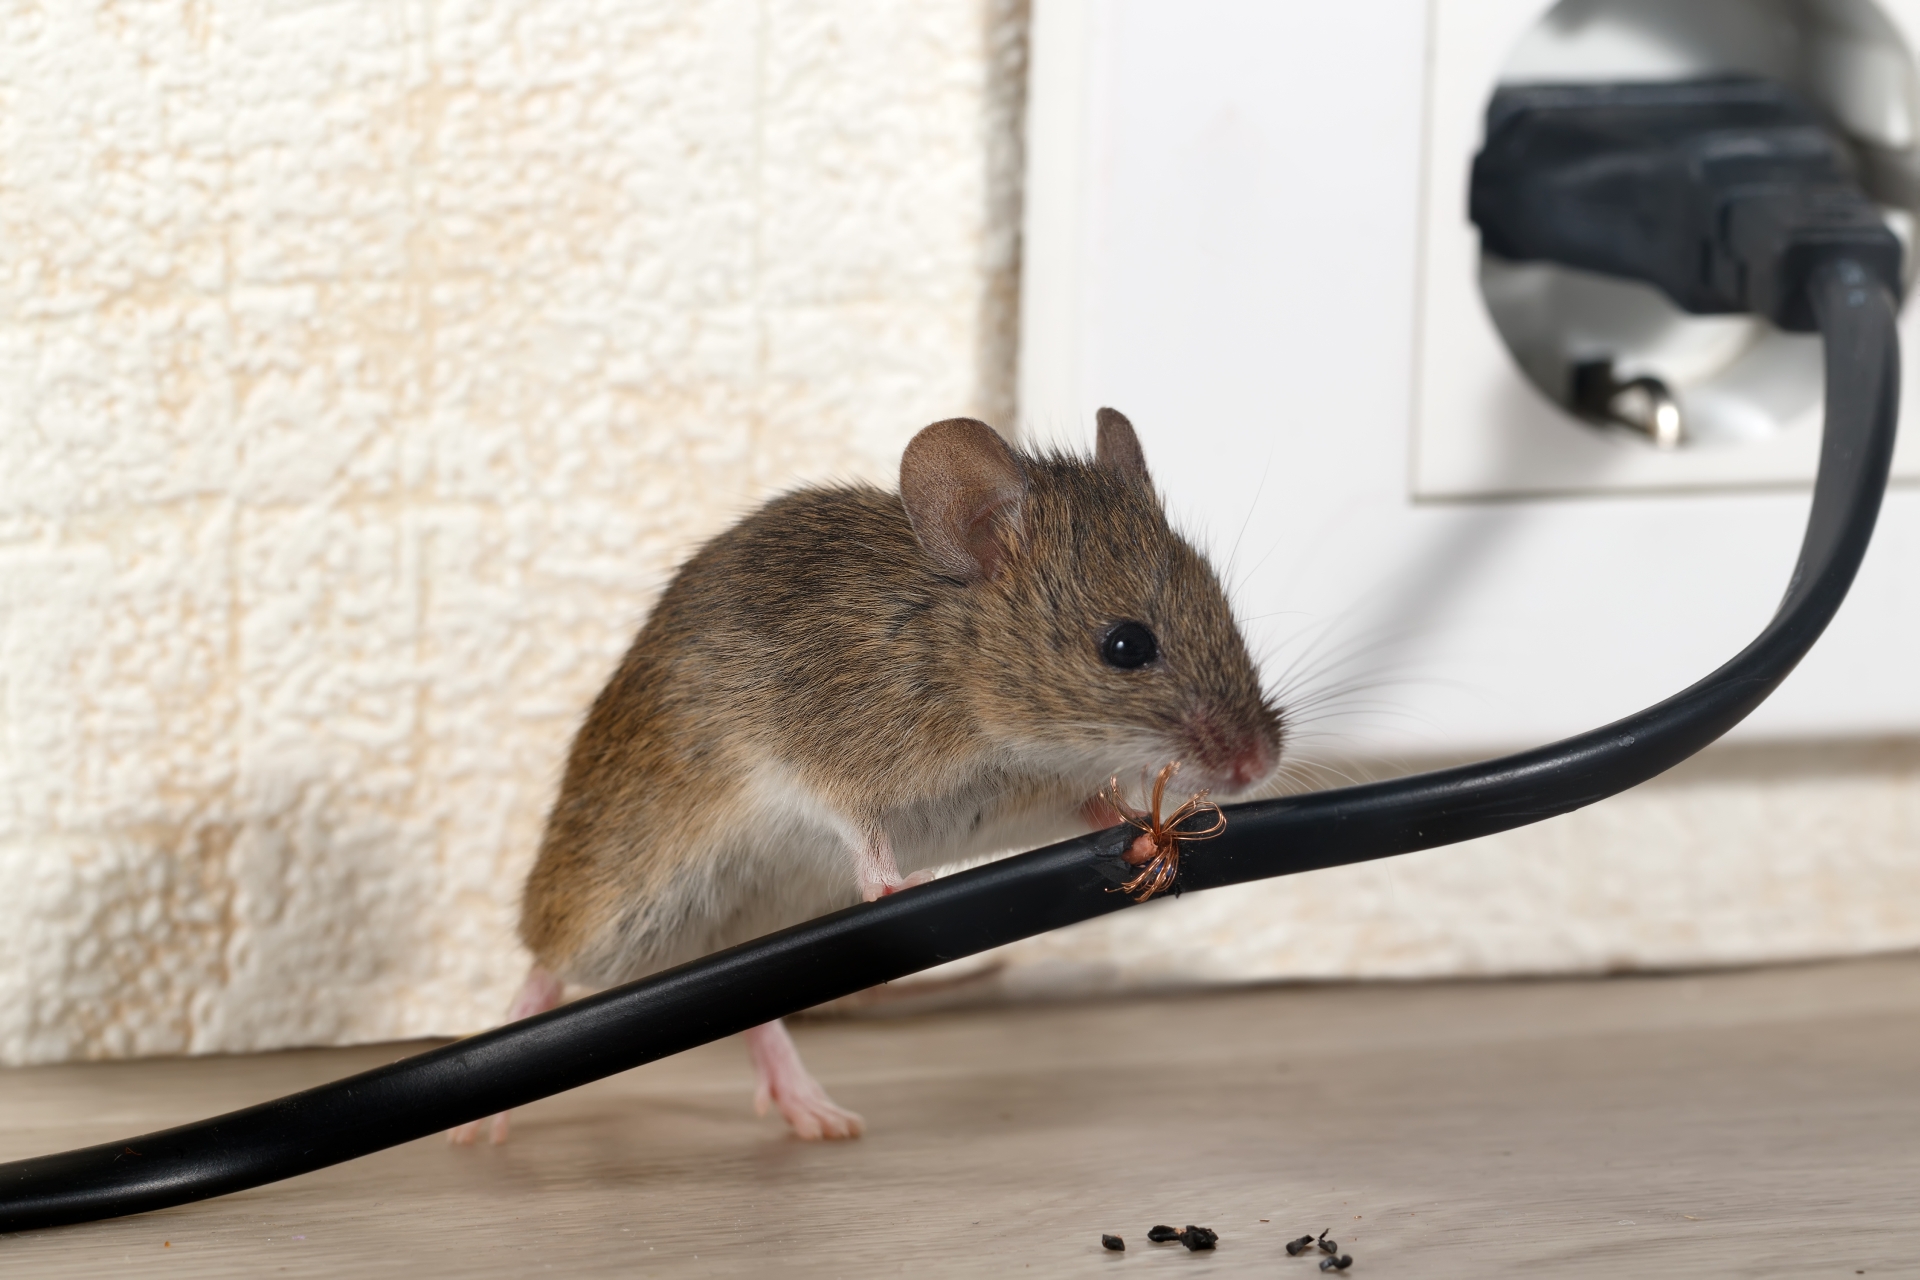 Mice Infestation, Pest Control in Hanwell, W7. Call Now 020 8166 9746